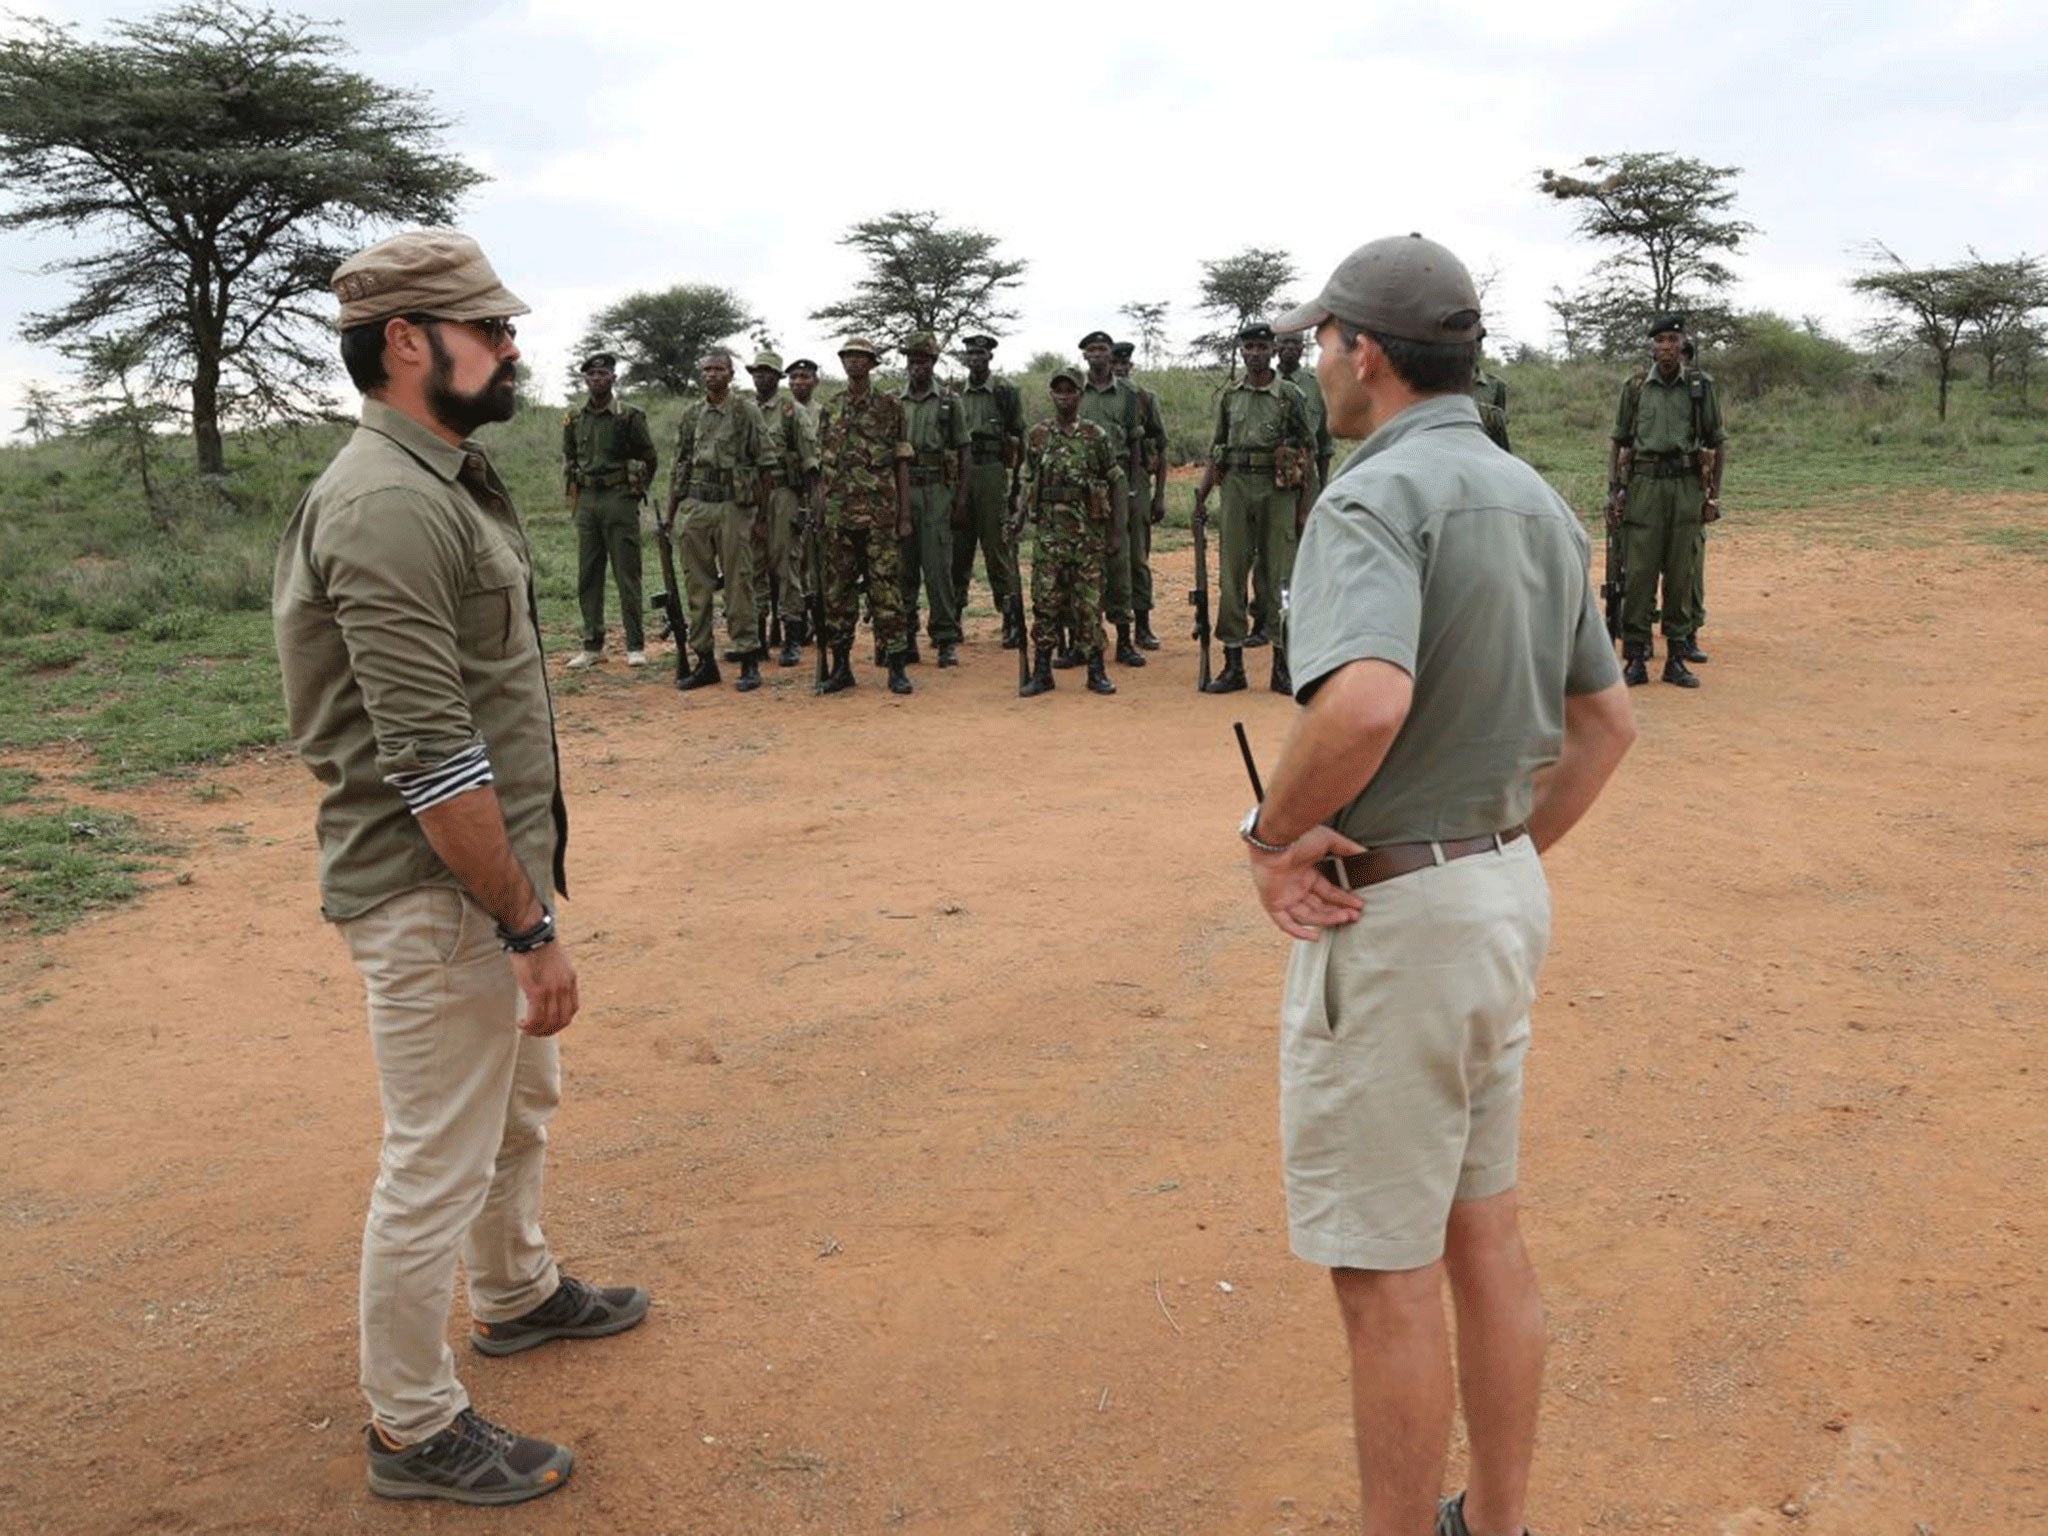 Space for Giants’ work has cut the number of elephants killed by poachers by 80 per cent in its conservation area; Evgeny Lebedev (left) meets an anti-poaching unit paid for by the appeal (Getty)